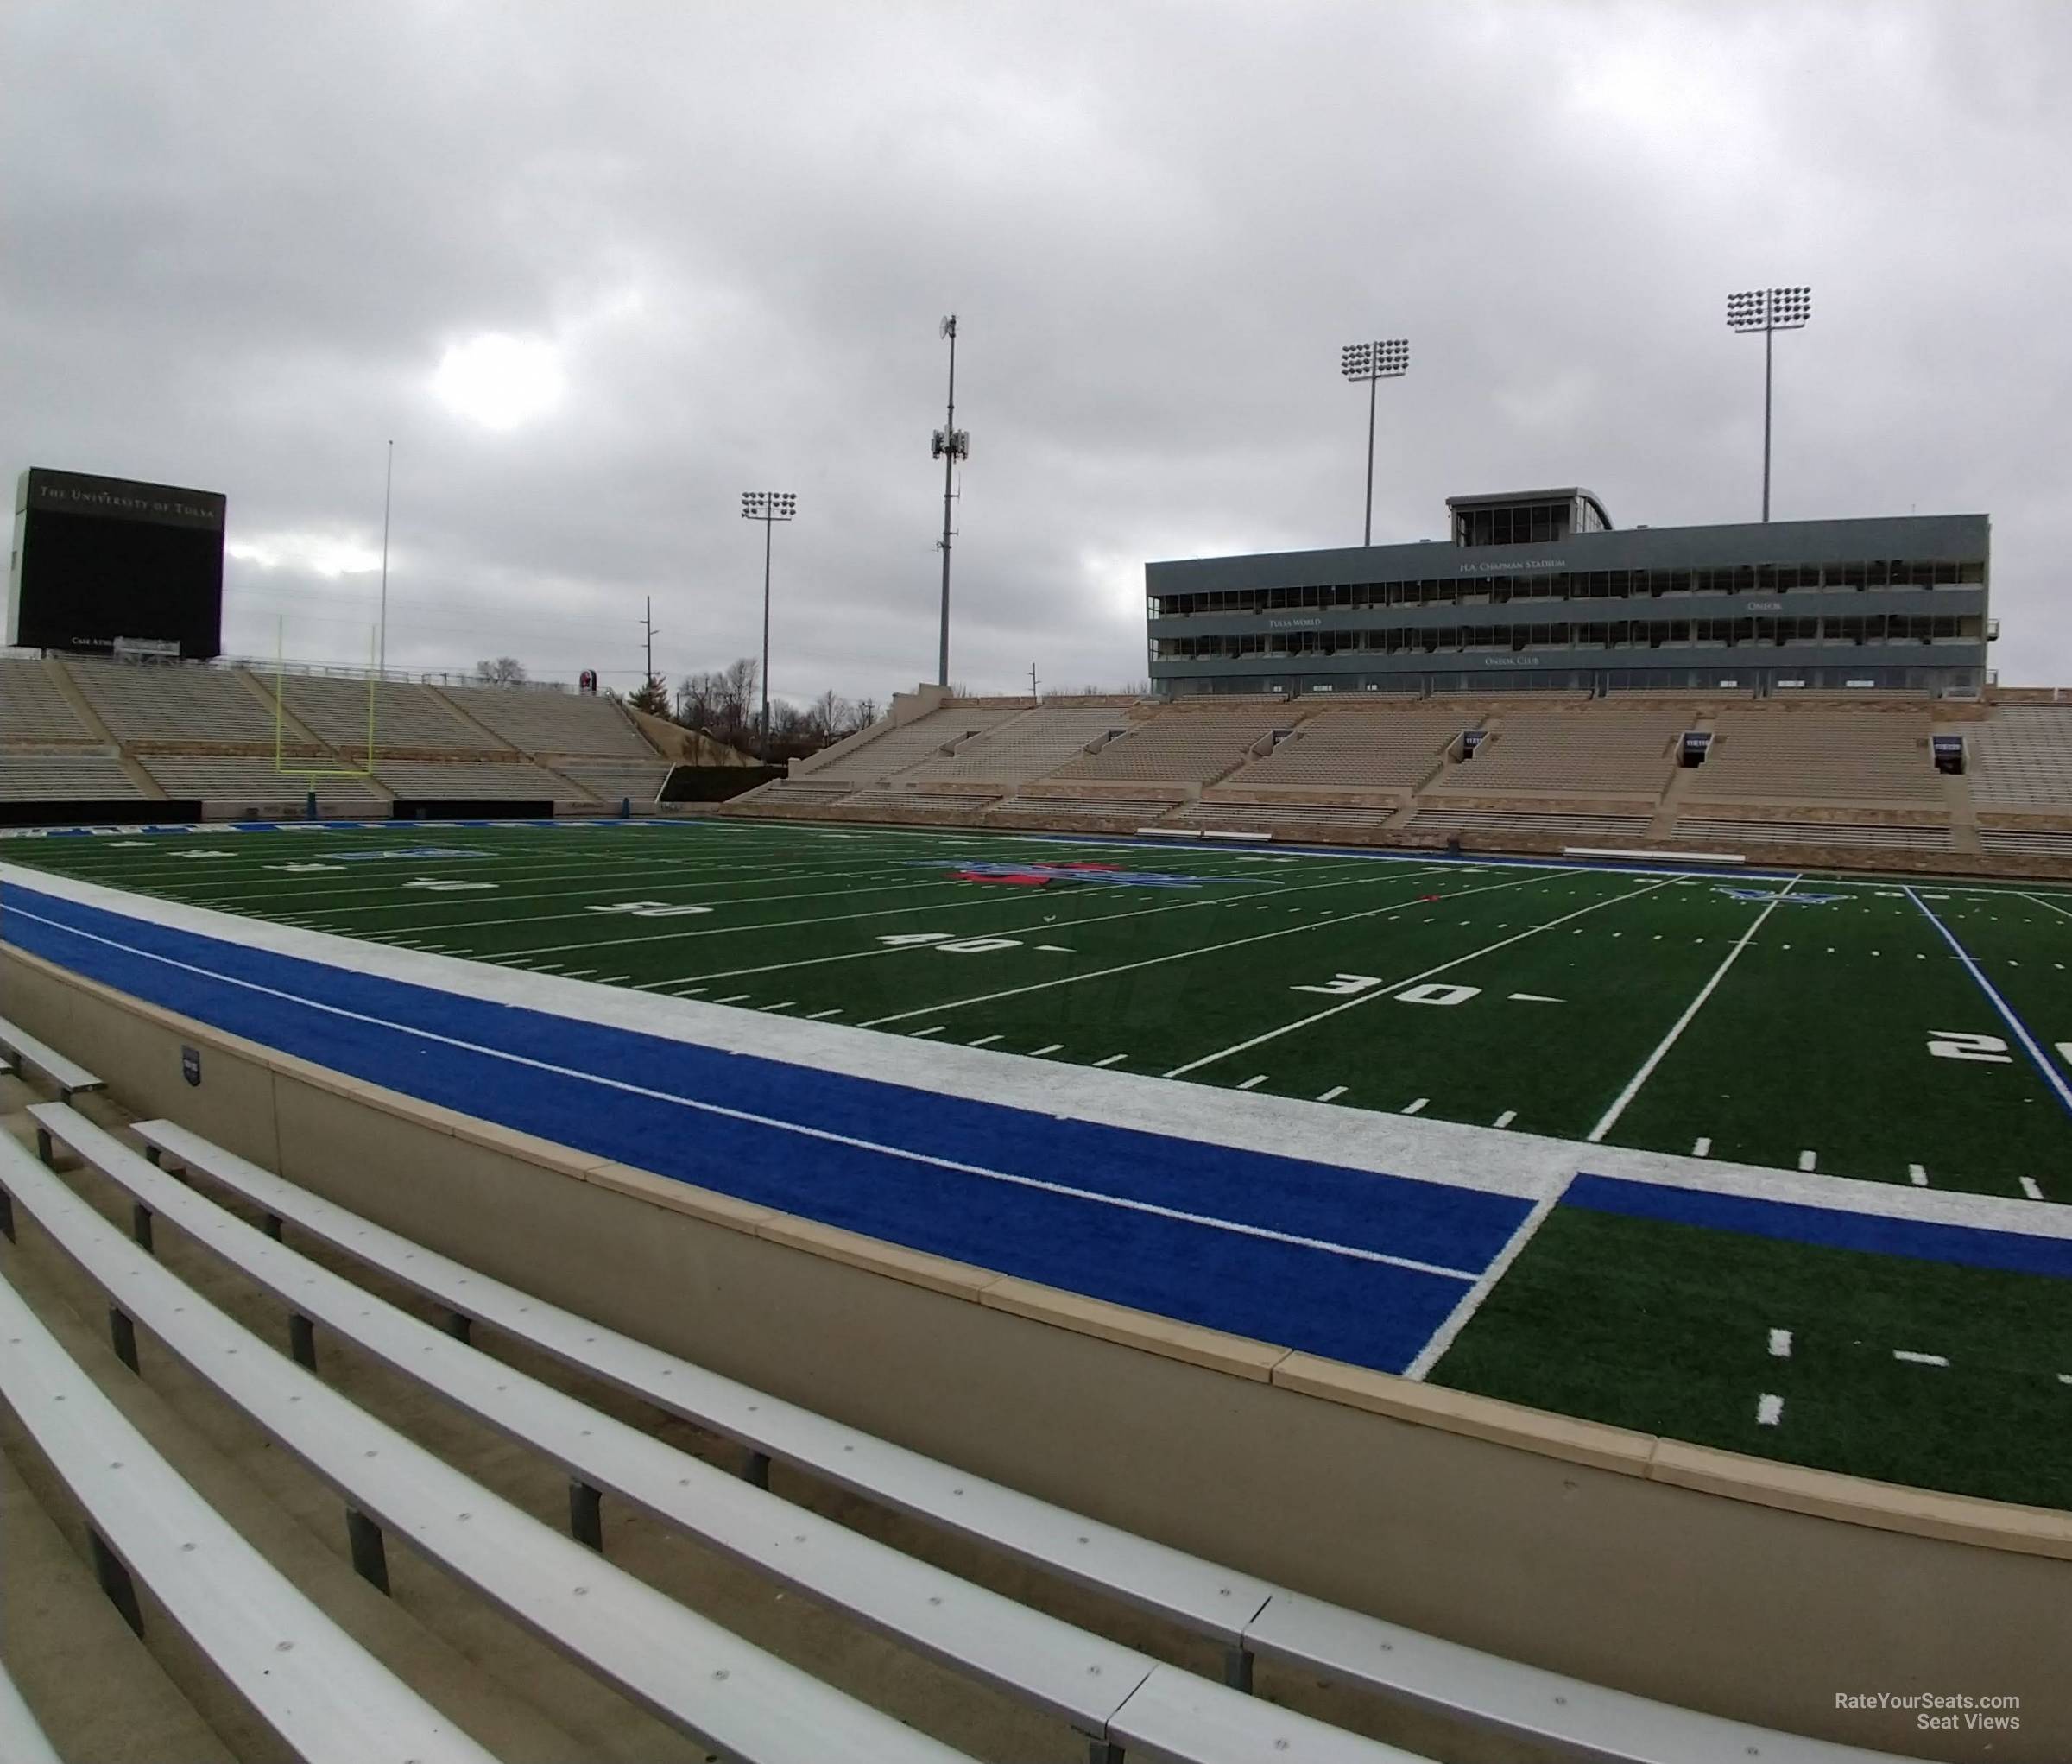 section 103, row 5 seat view  - h.a. chapman stadium